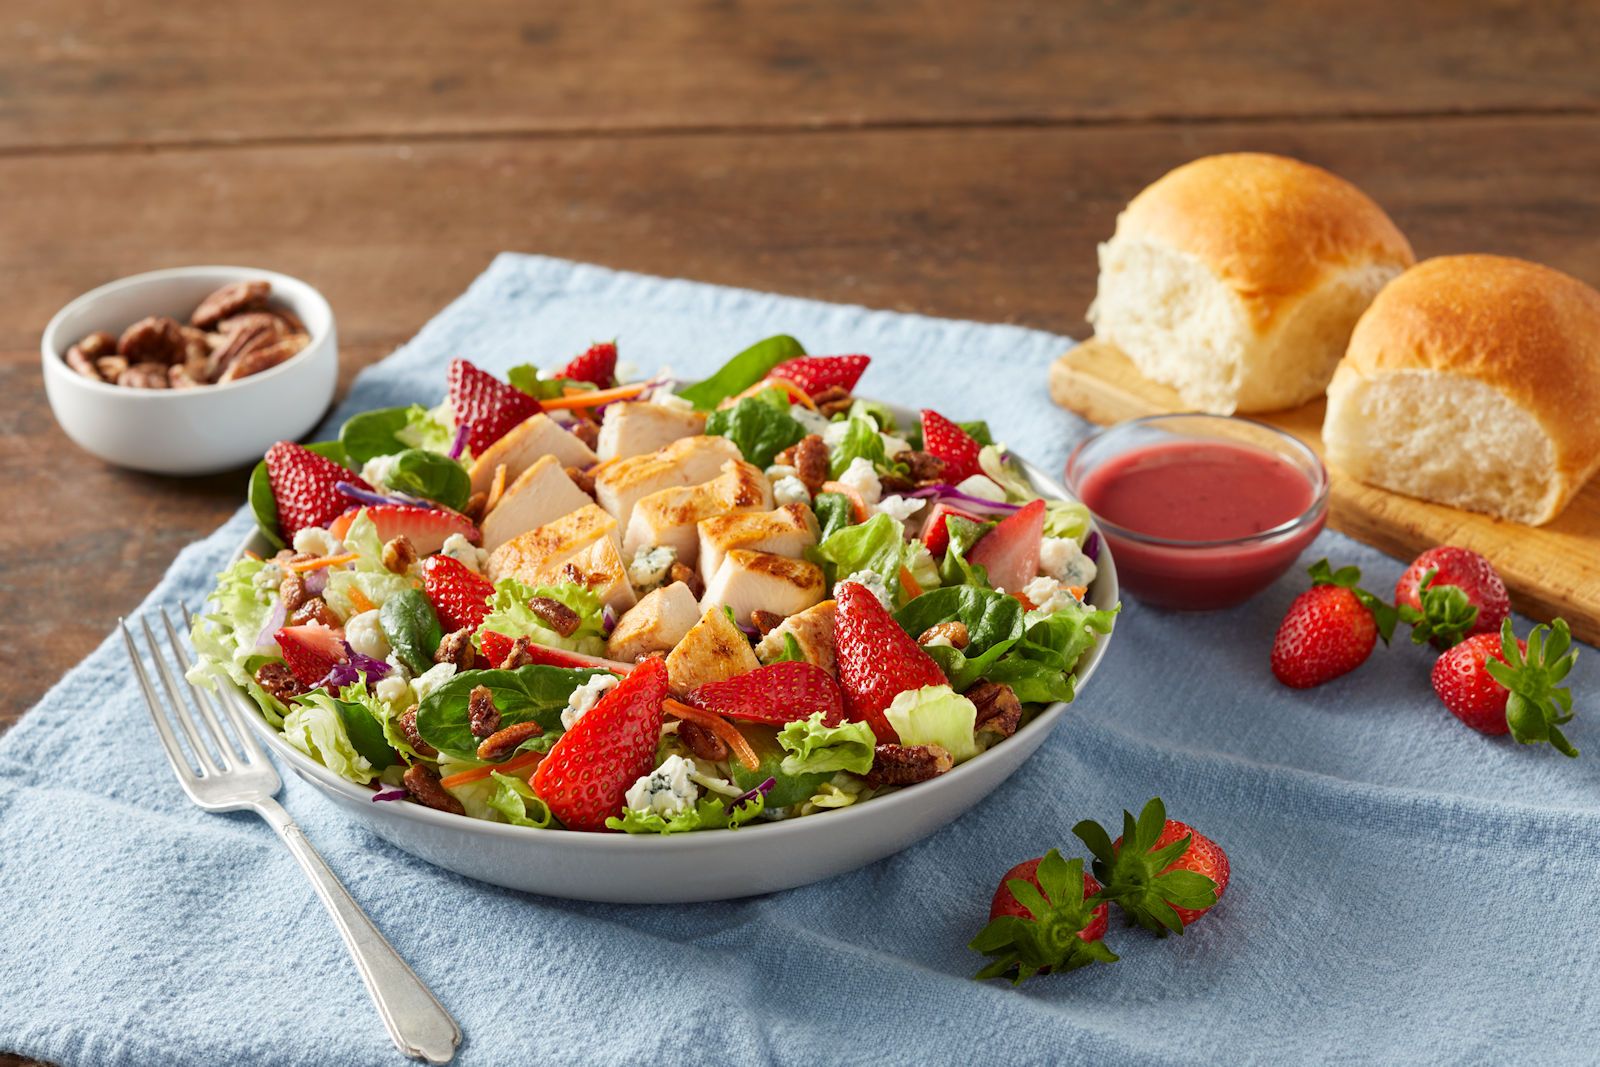 Bob Evans Restaurants Introduces New Farm-Fresh Berry Dishes for Spring